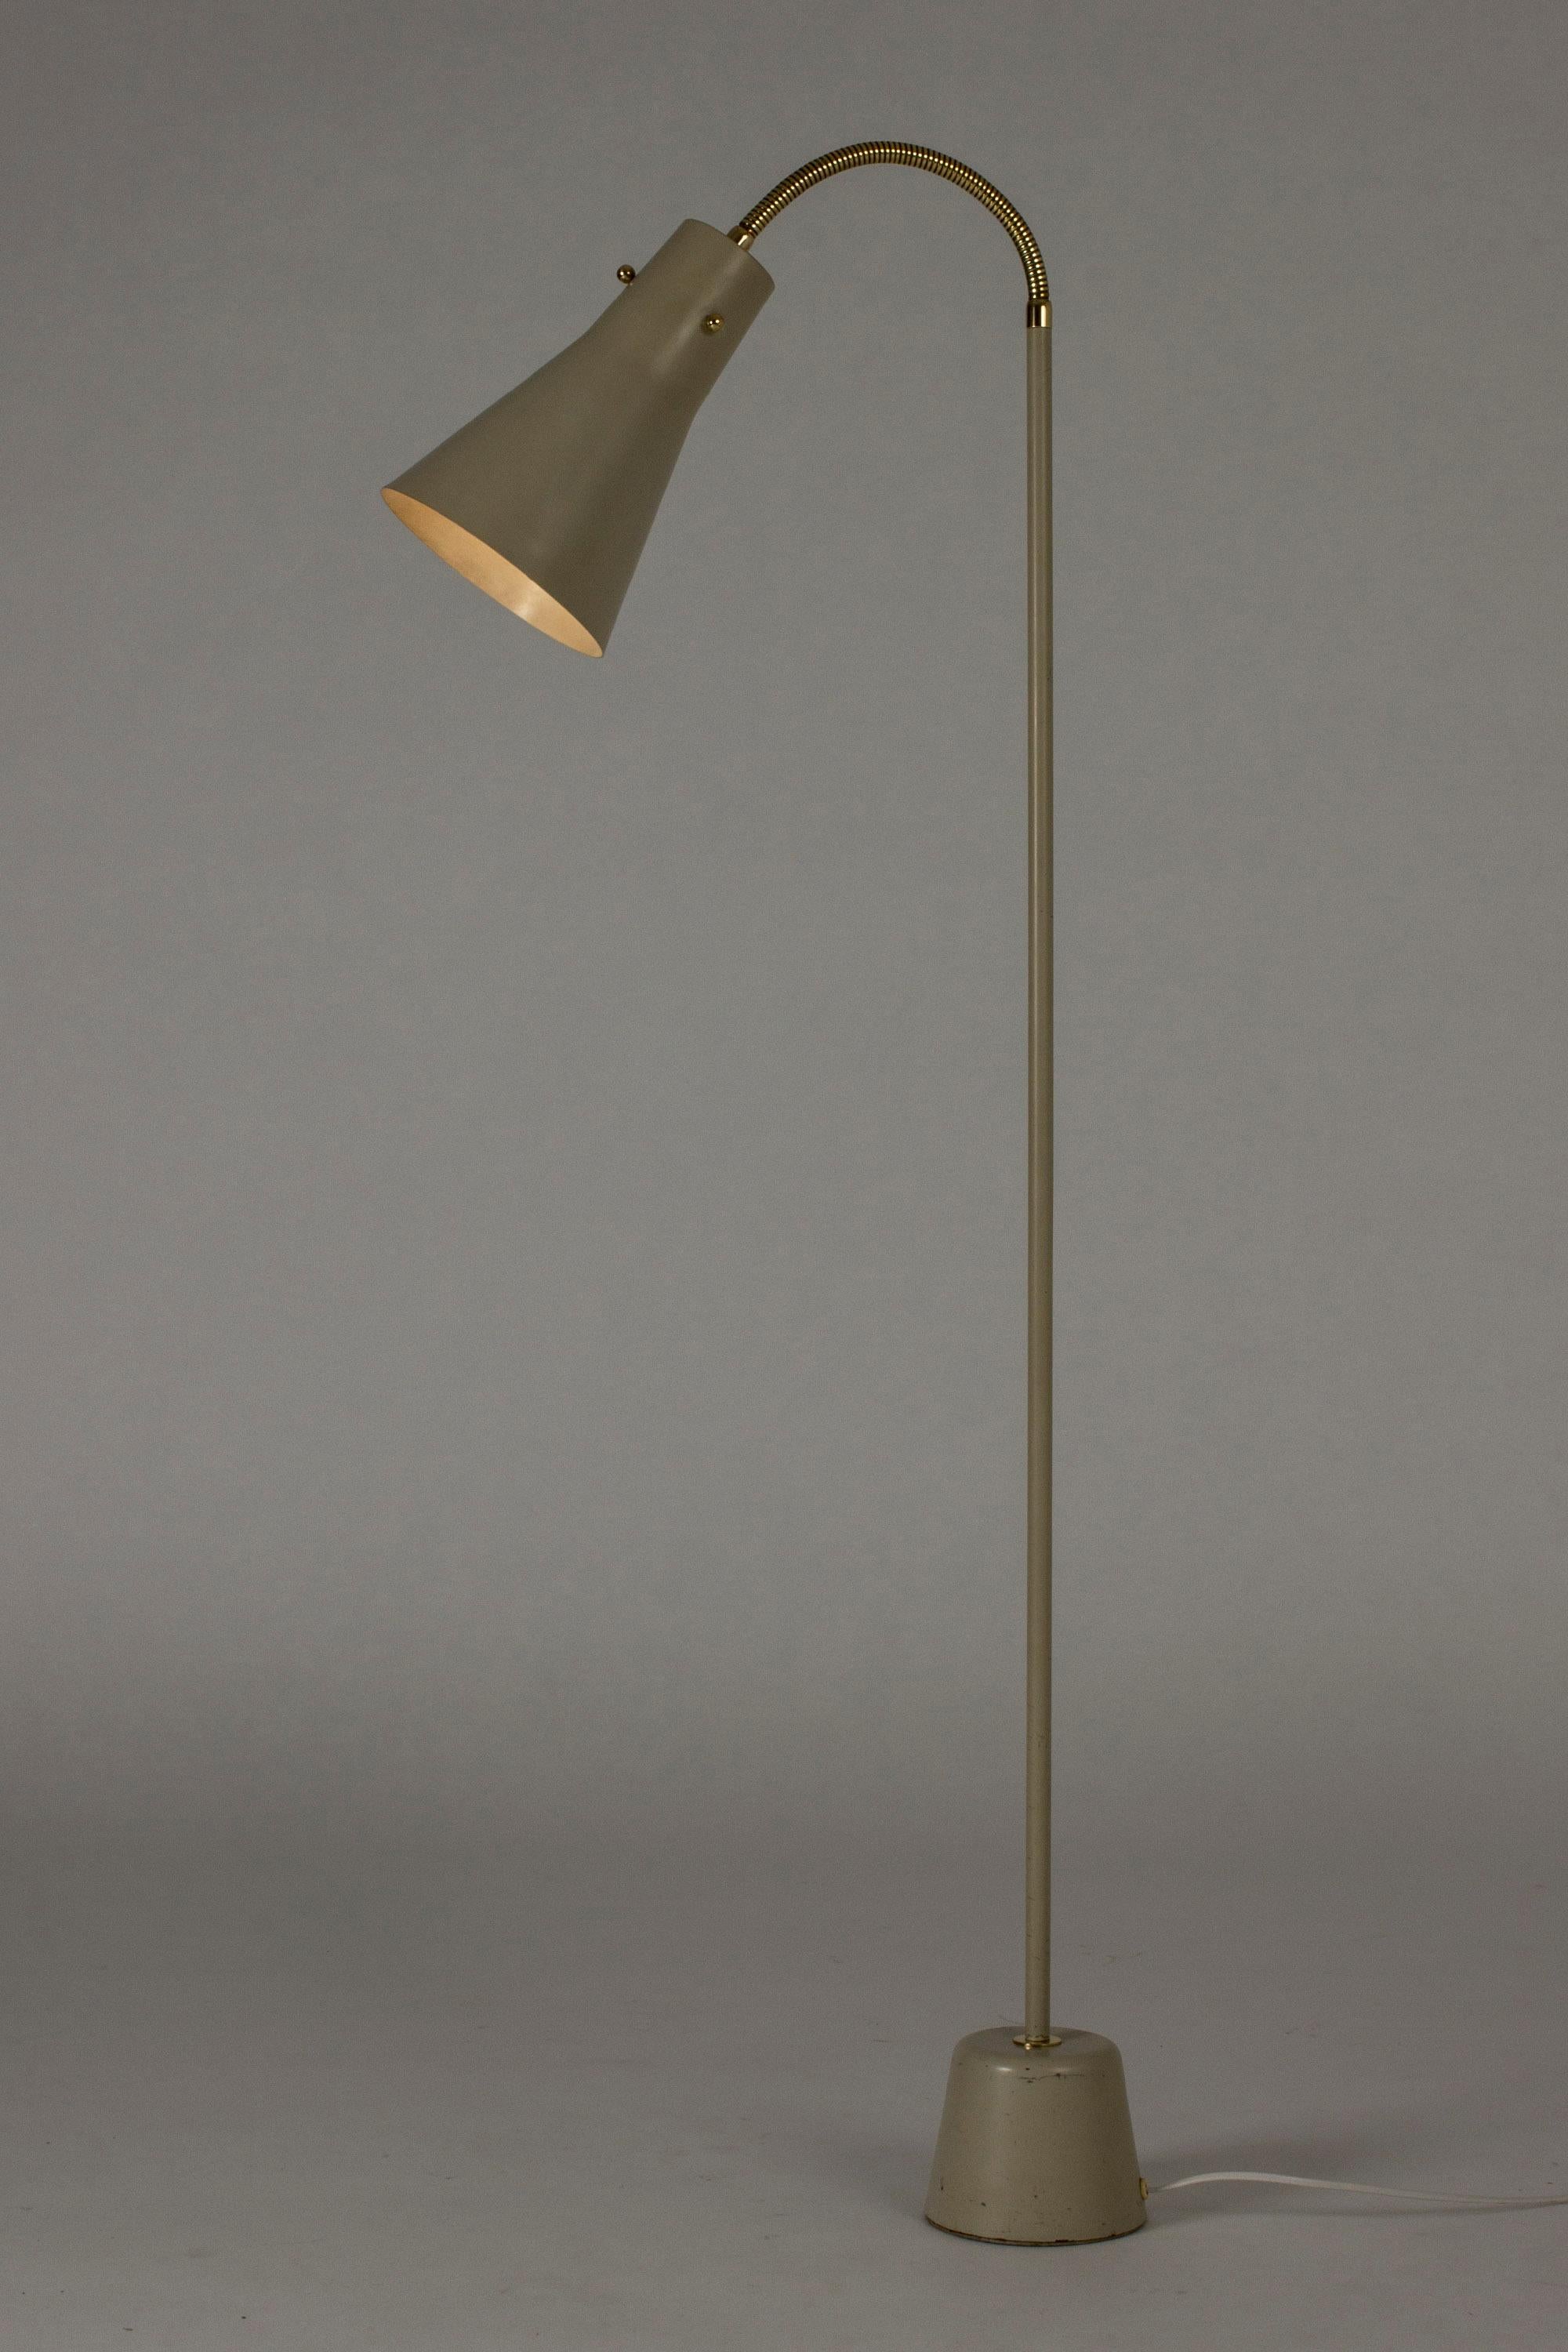 Finnish Lacquered Metal Floor Lamp by Lisa Johansson-Pape